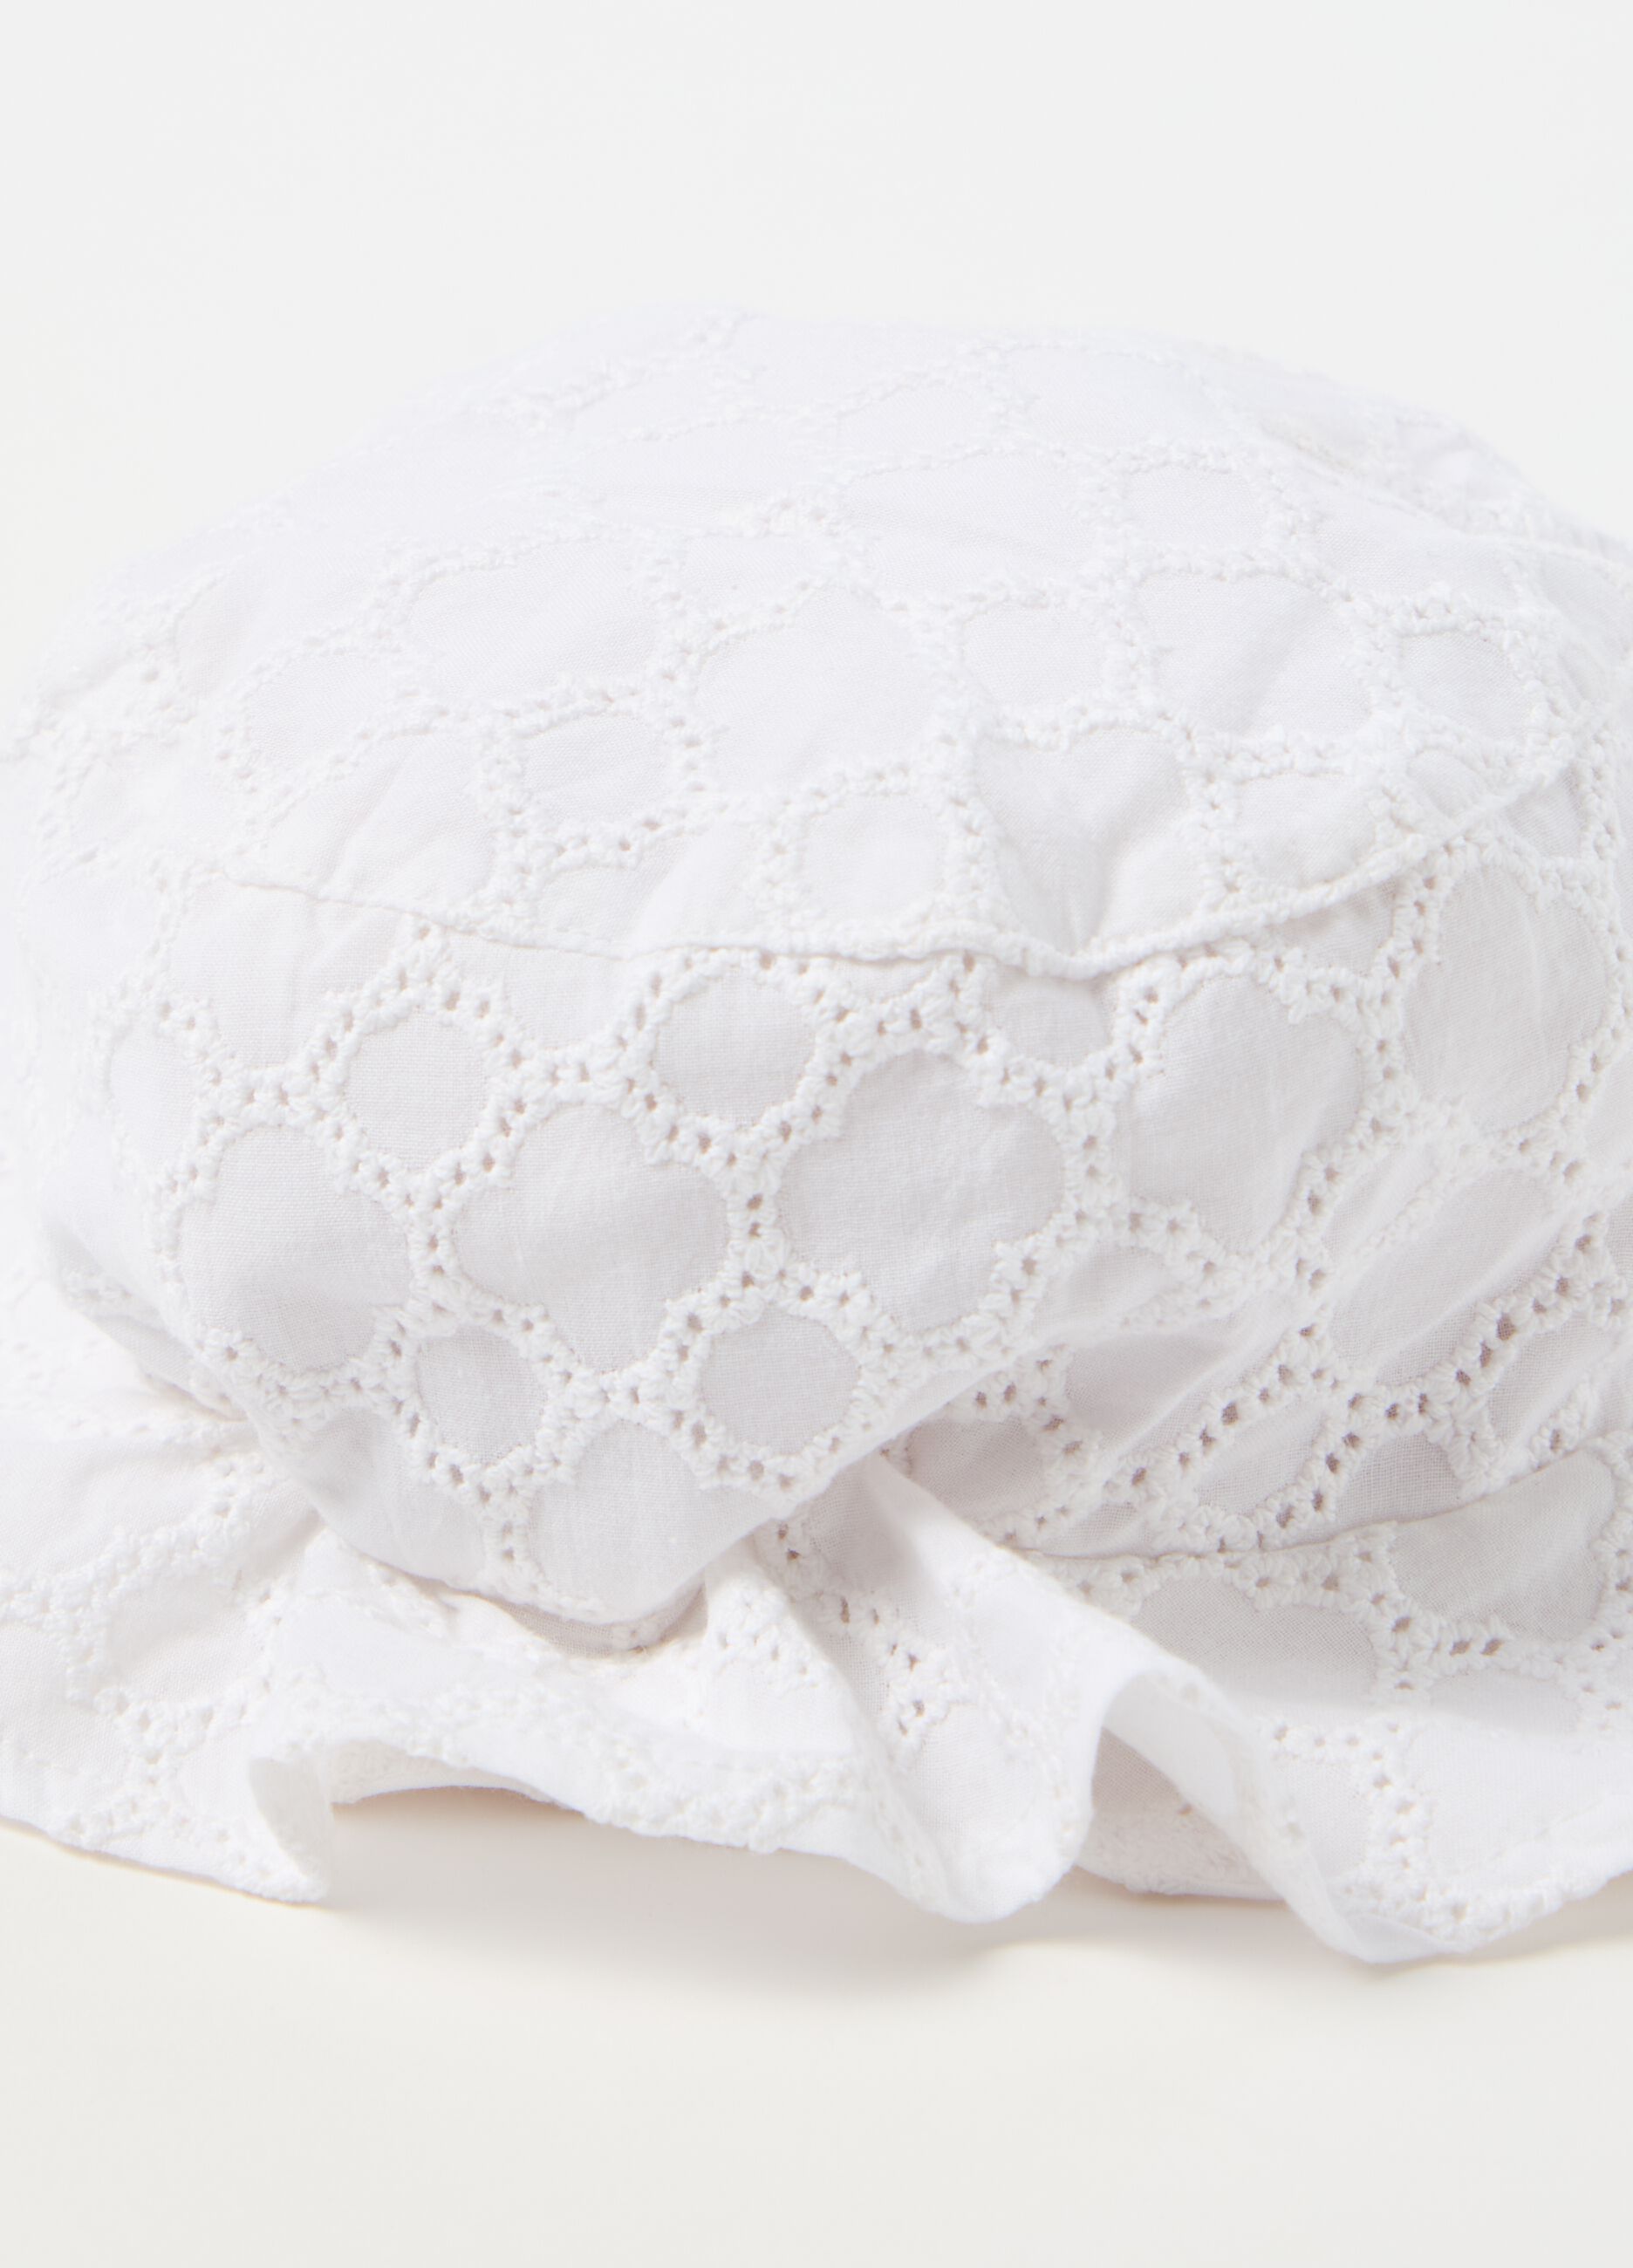 Hat in broderie anglaise